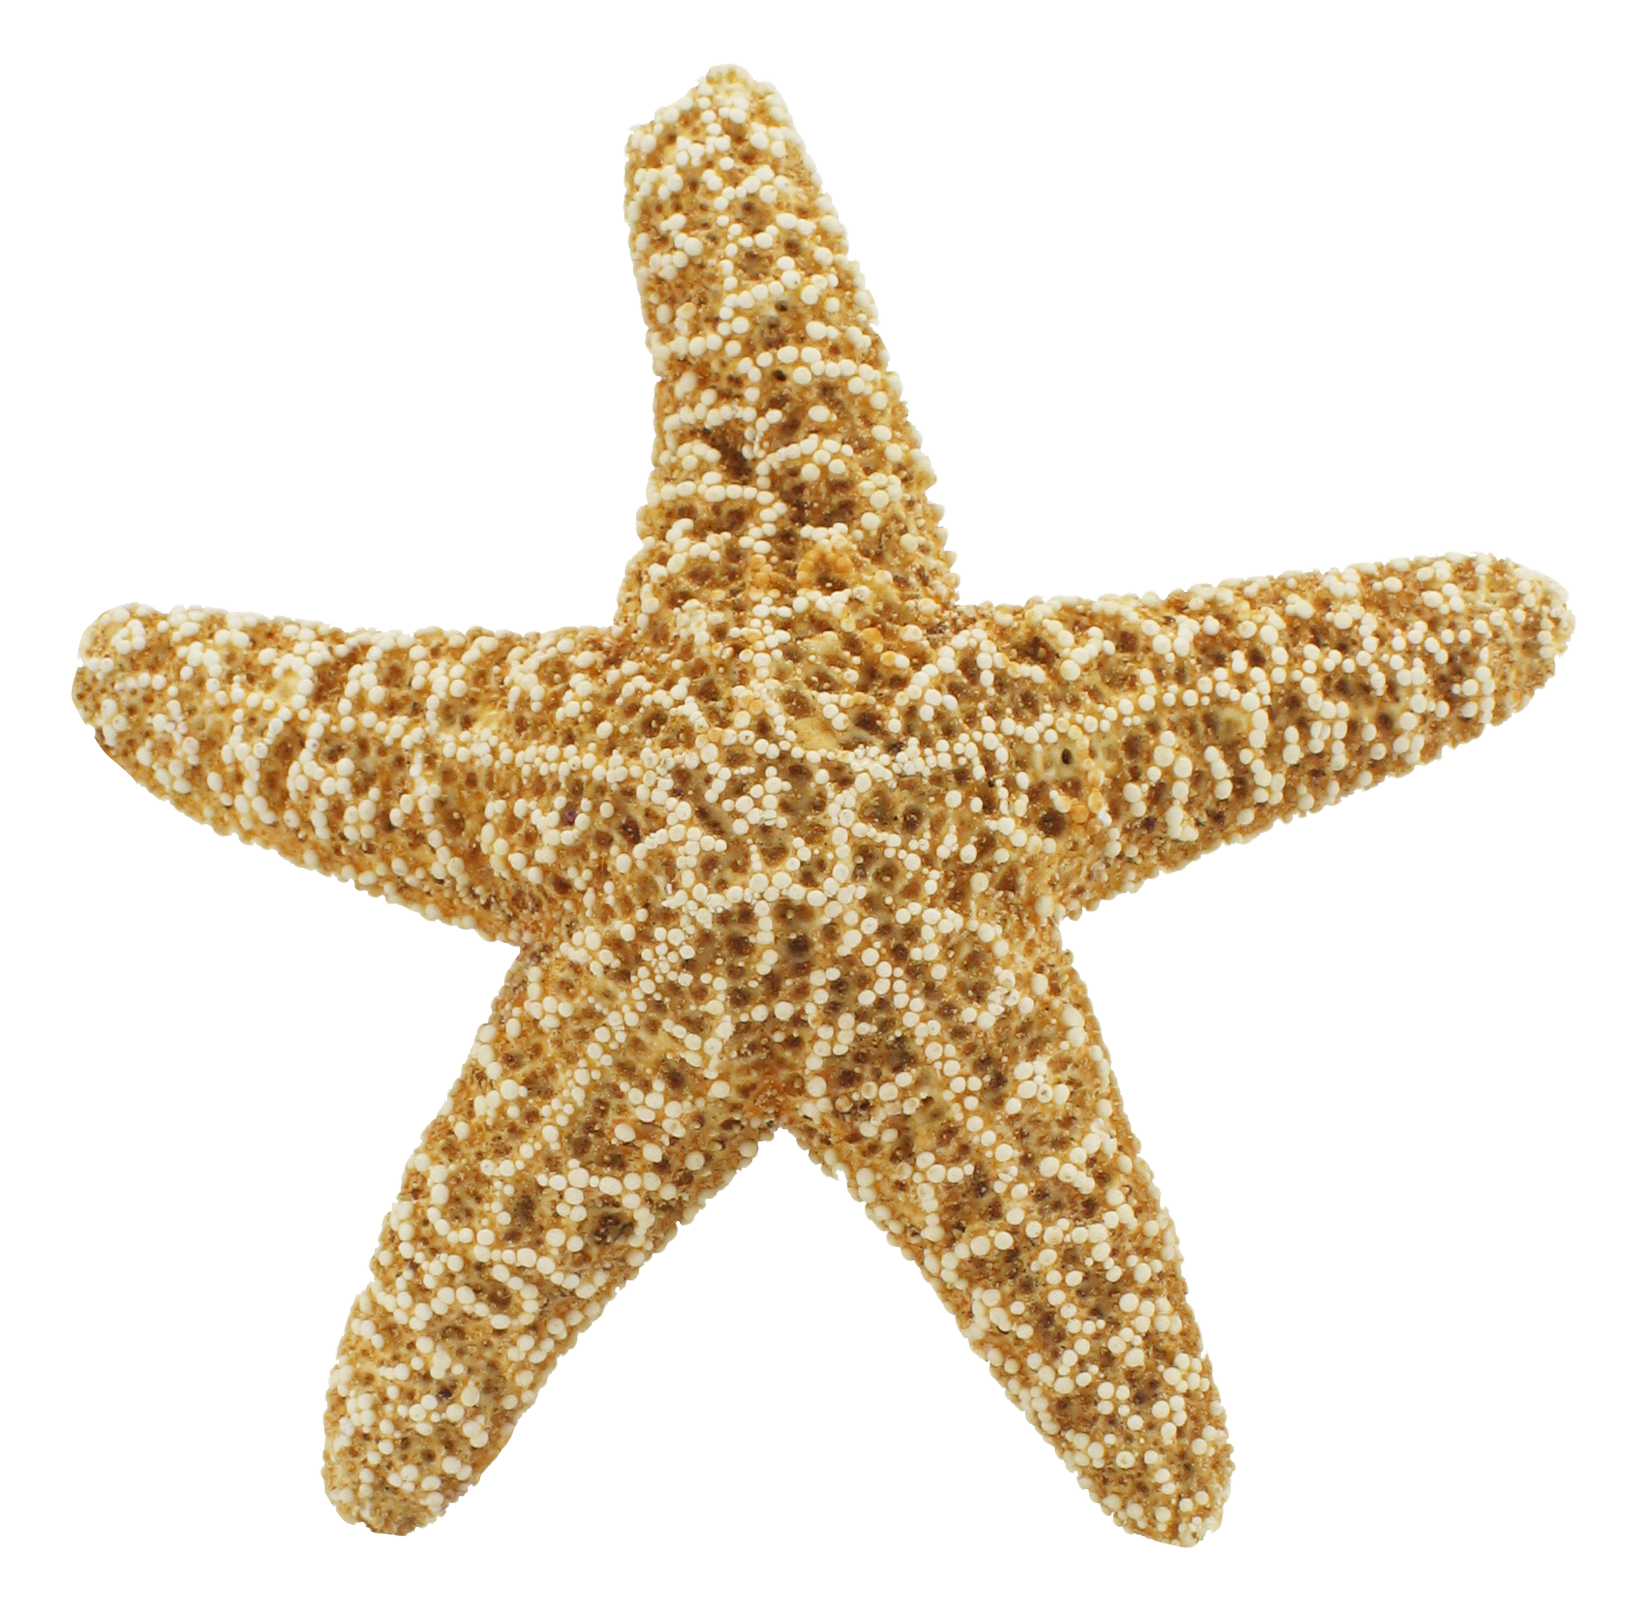 Starfish PNG images